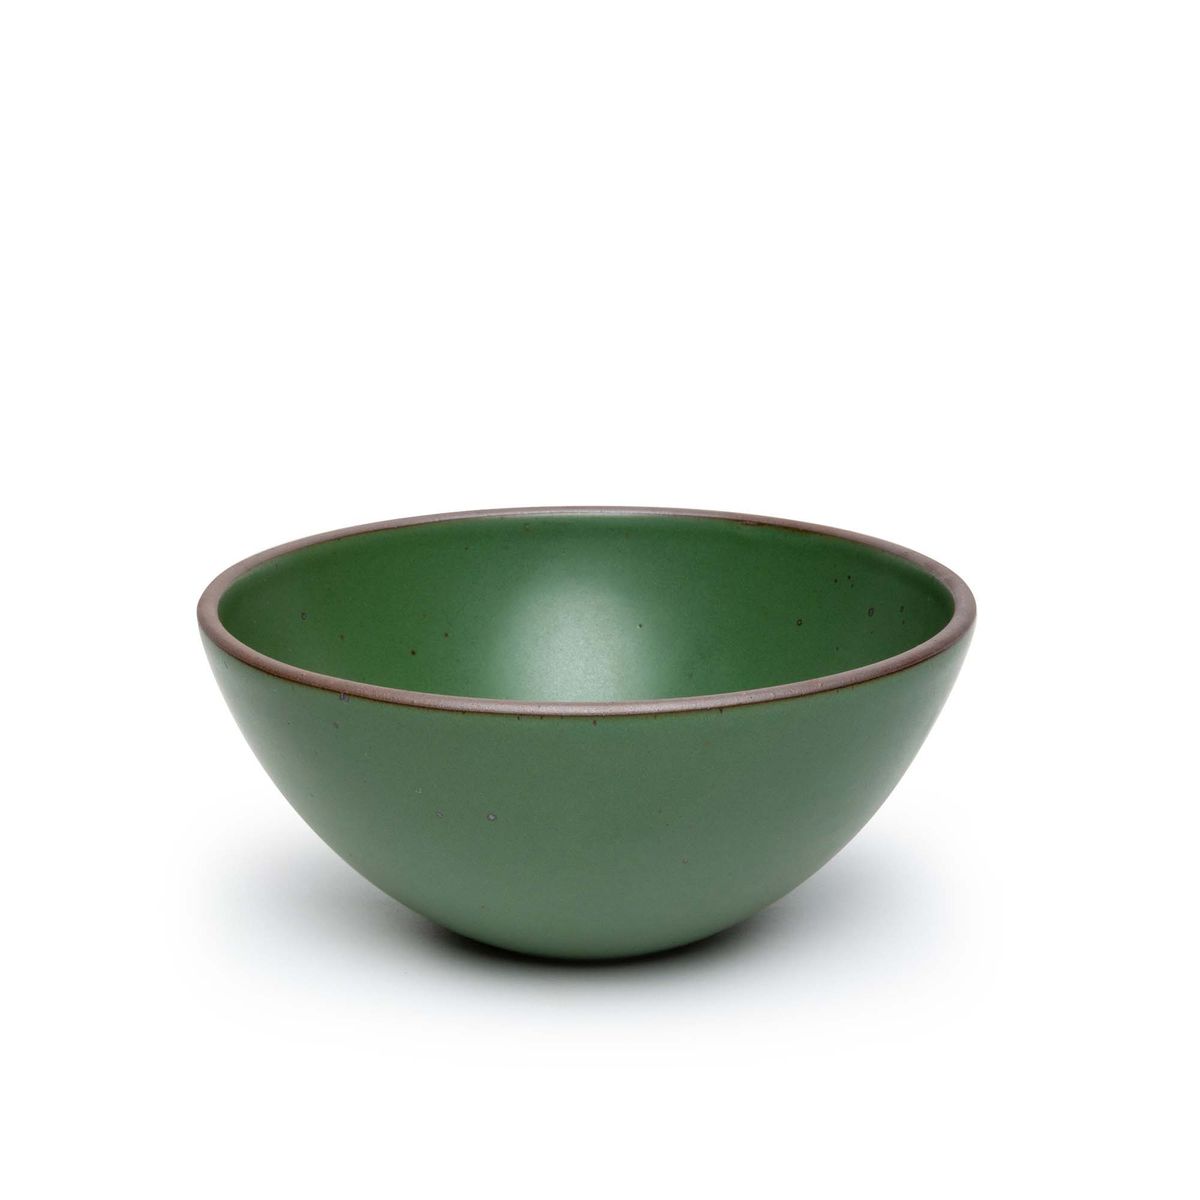 A large rounded ceramic bowl in a deep, verdant green color featuring iron speckles and an unglazed rim